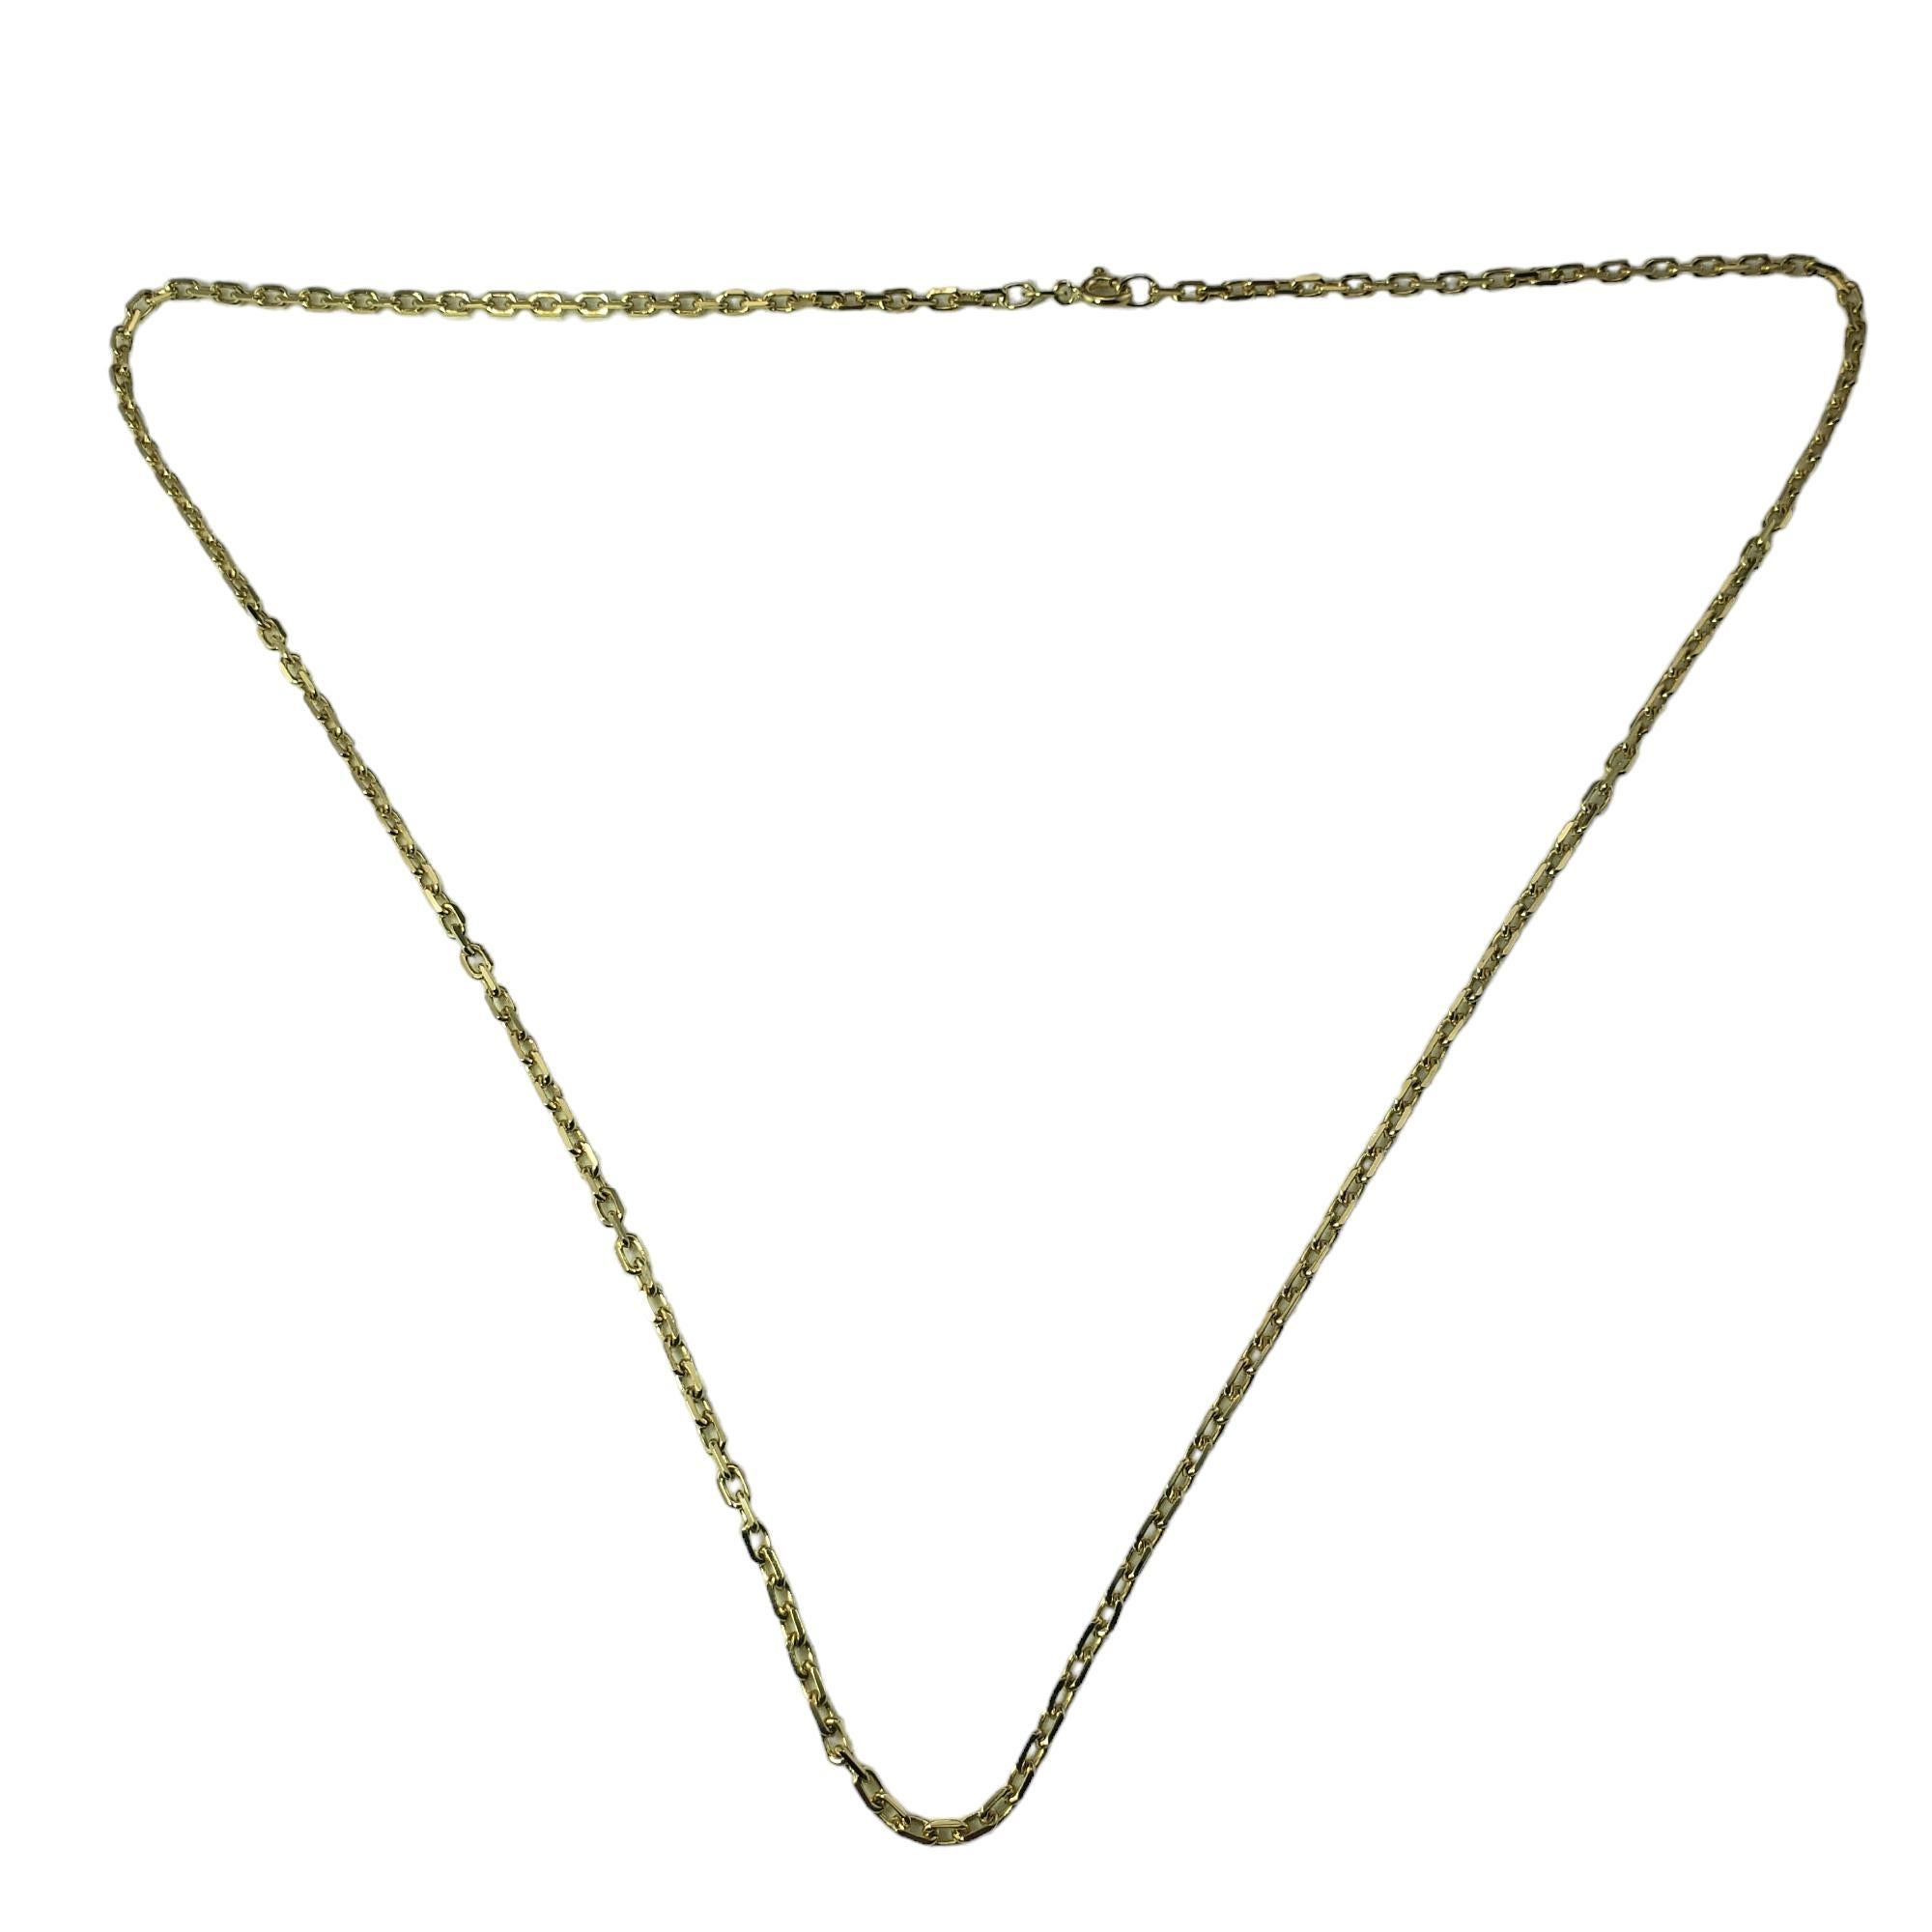 Vintage 14 Karat Yellow Gold Link Necklace-

This lovely link necklace is crafted in meticulously detailed 14K yellow gold.  Width:  2 mm.

Size: 22 inches

Stamped: 14K

Weight: 10.3 gr./ 6.6 dwt.

Very good condition, professionally